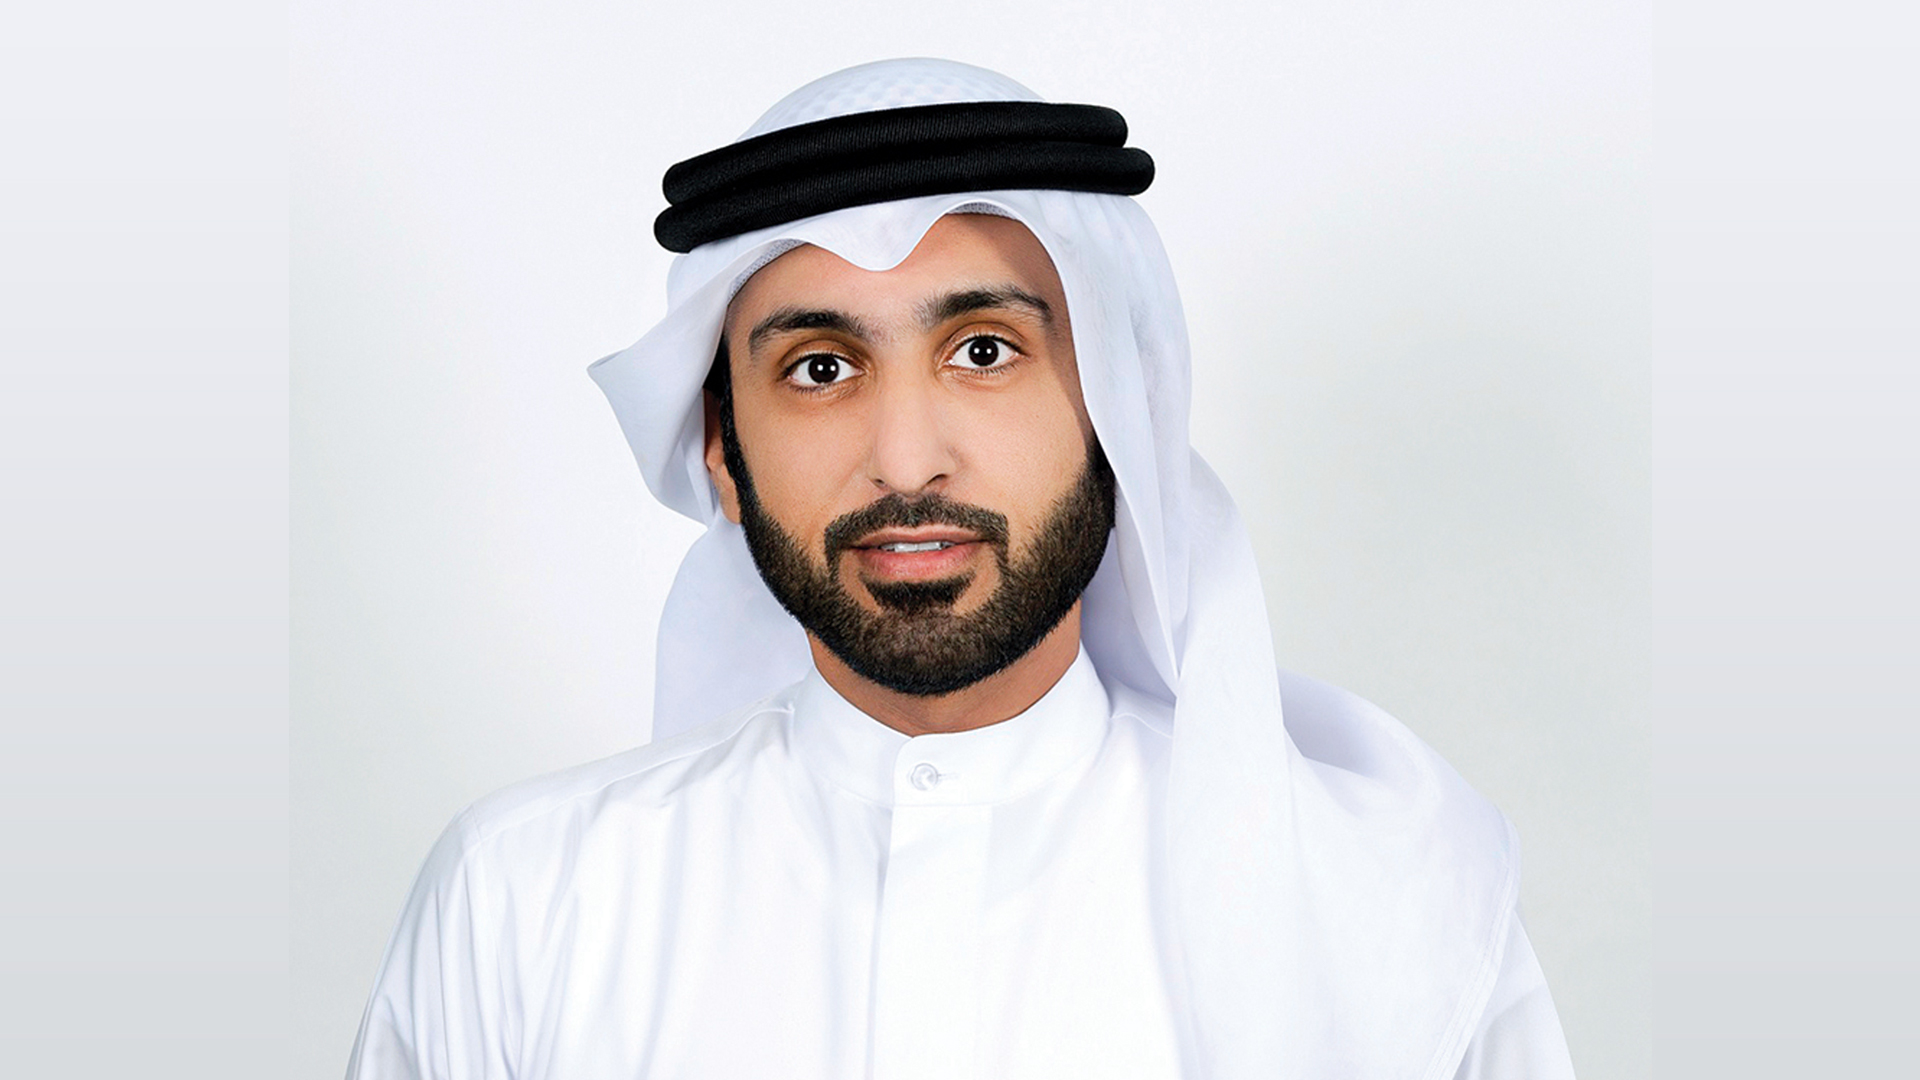 Sharjah Safety Authority launches heat exhaustion prevention campaign